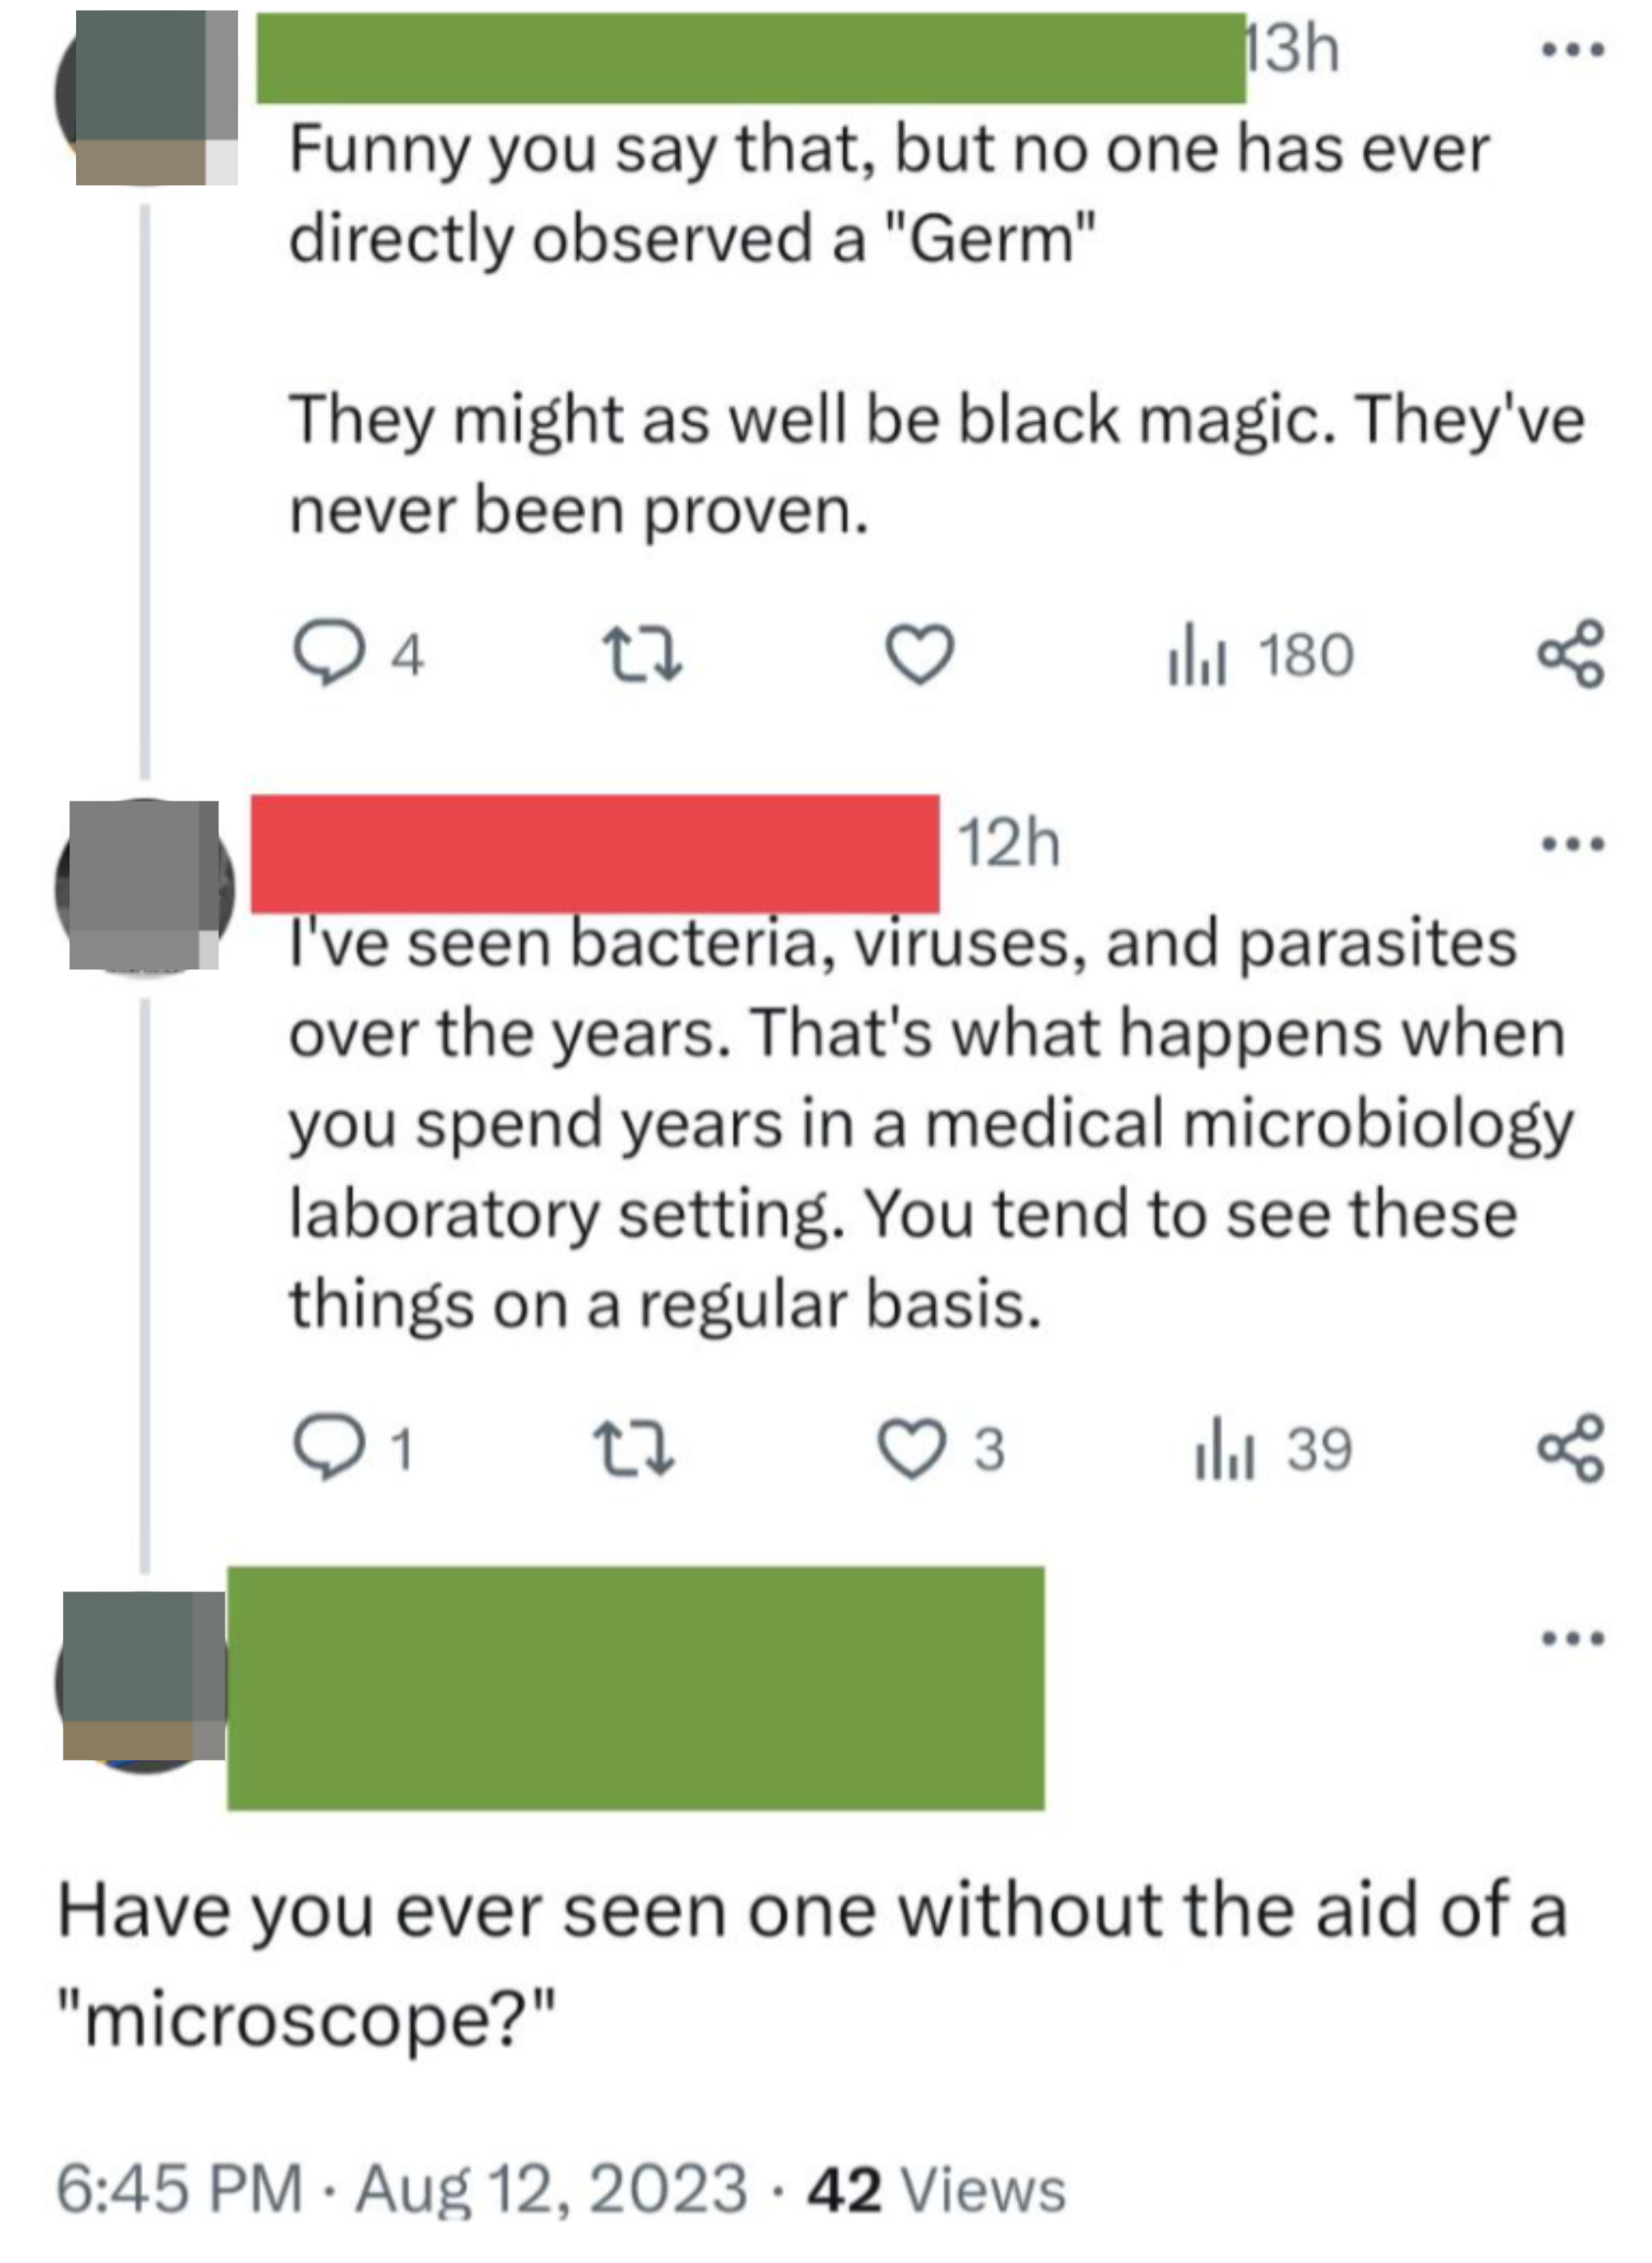 Person says germs may be black magic because &quot;no one has ever directly observed one&quot;; when person says they&#x27;ve seen bacteria, viruses, and parasites from years in a microbiology lab, person asks if they&#x27;ve seen one without a &quot;microscope&quot;